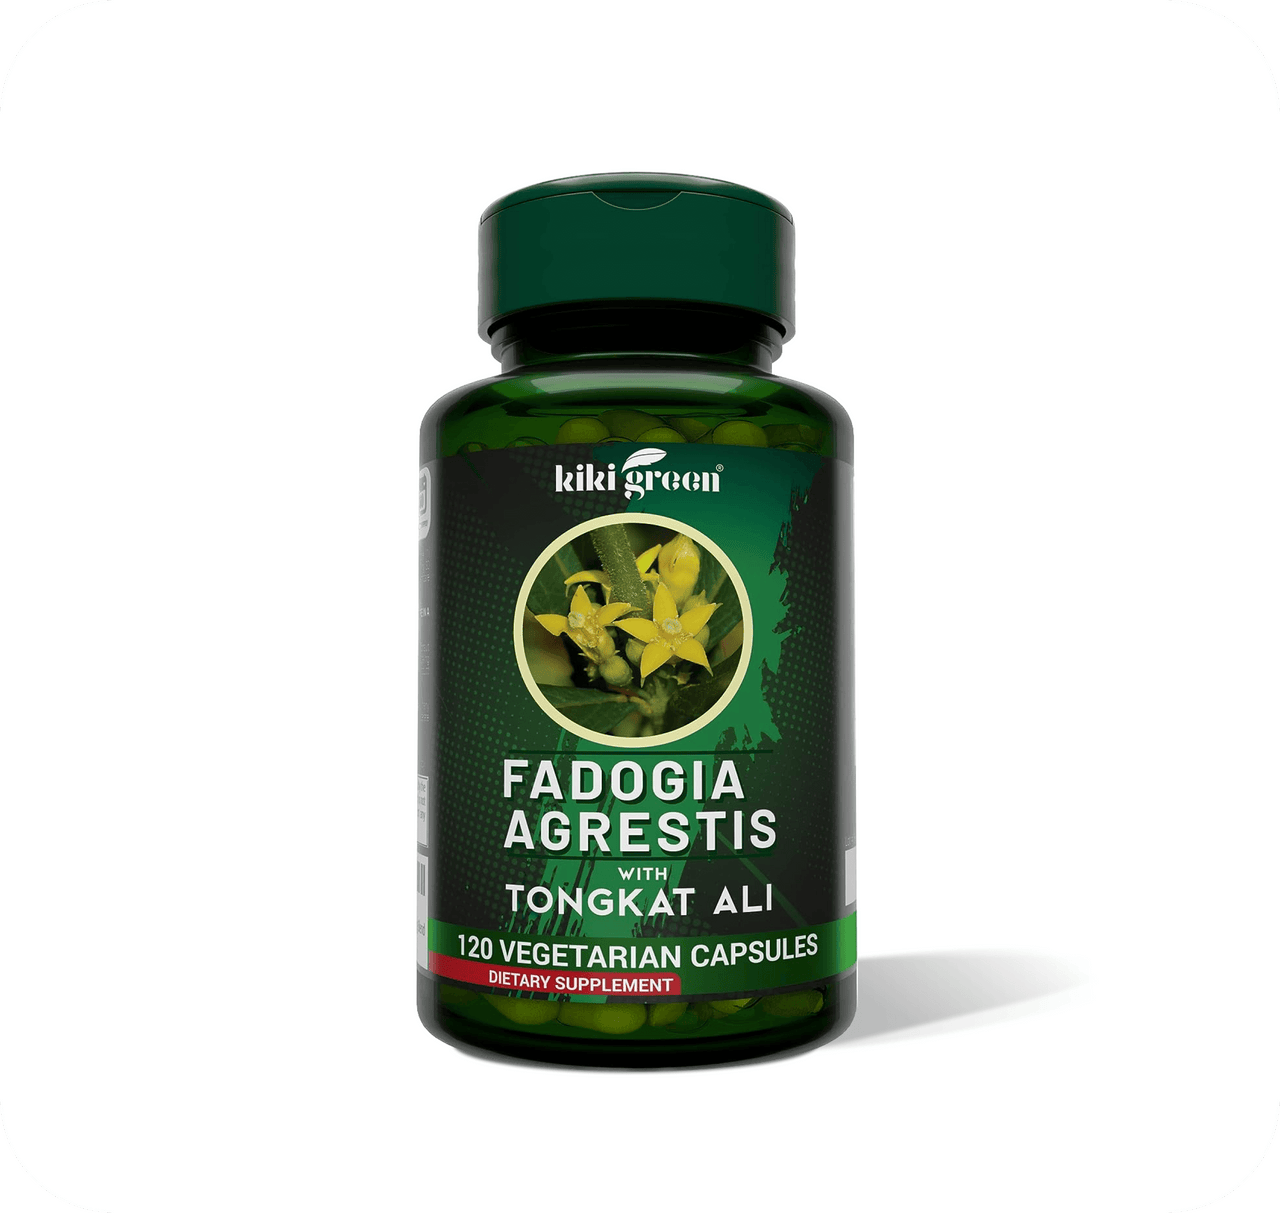 Fadogia Agrestis Extract with Tongkat ali - Ultra Strength & Support Energy